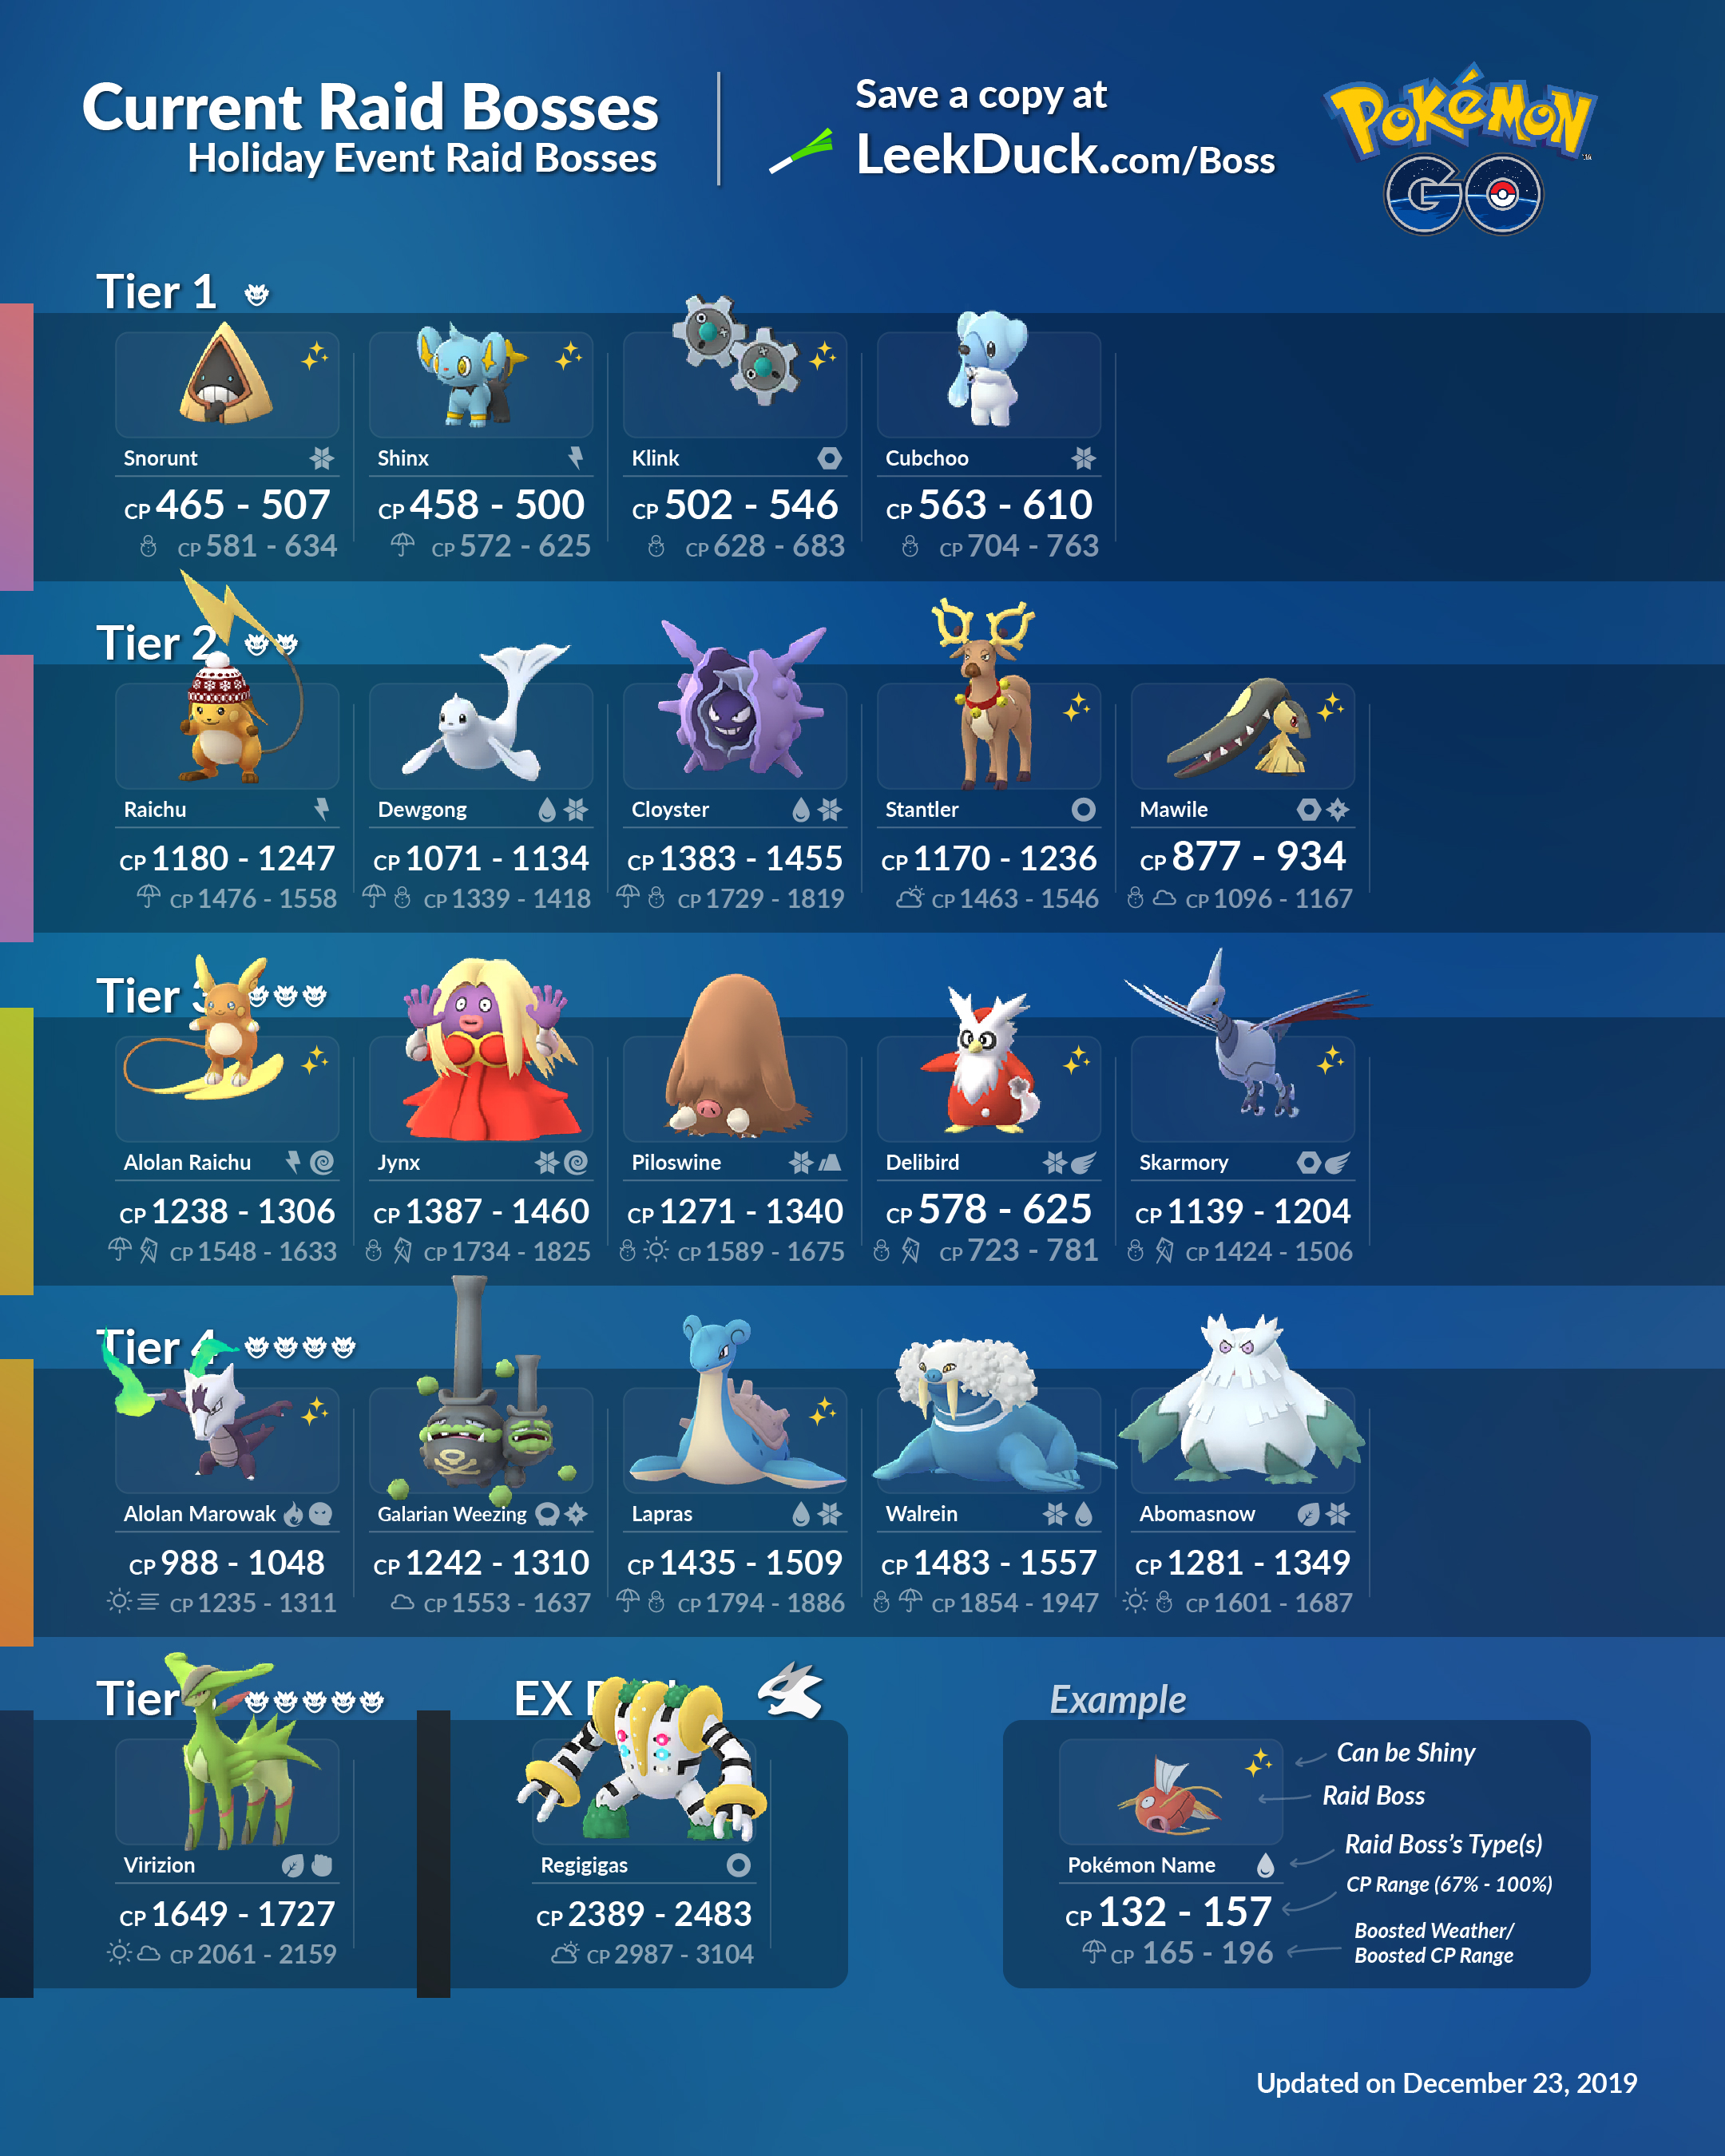 Duck Twitter: "UPDATED: Current Raid Bosses - Pokémon Holidays 2019 Save a copy at https://t.co/WDyGfe9f4b" / Twitter